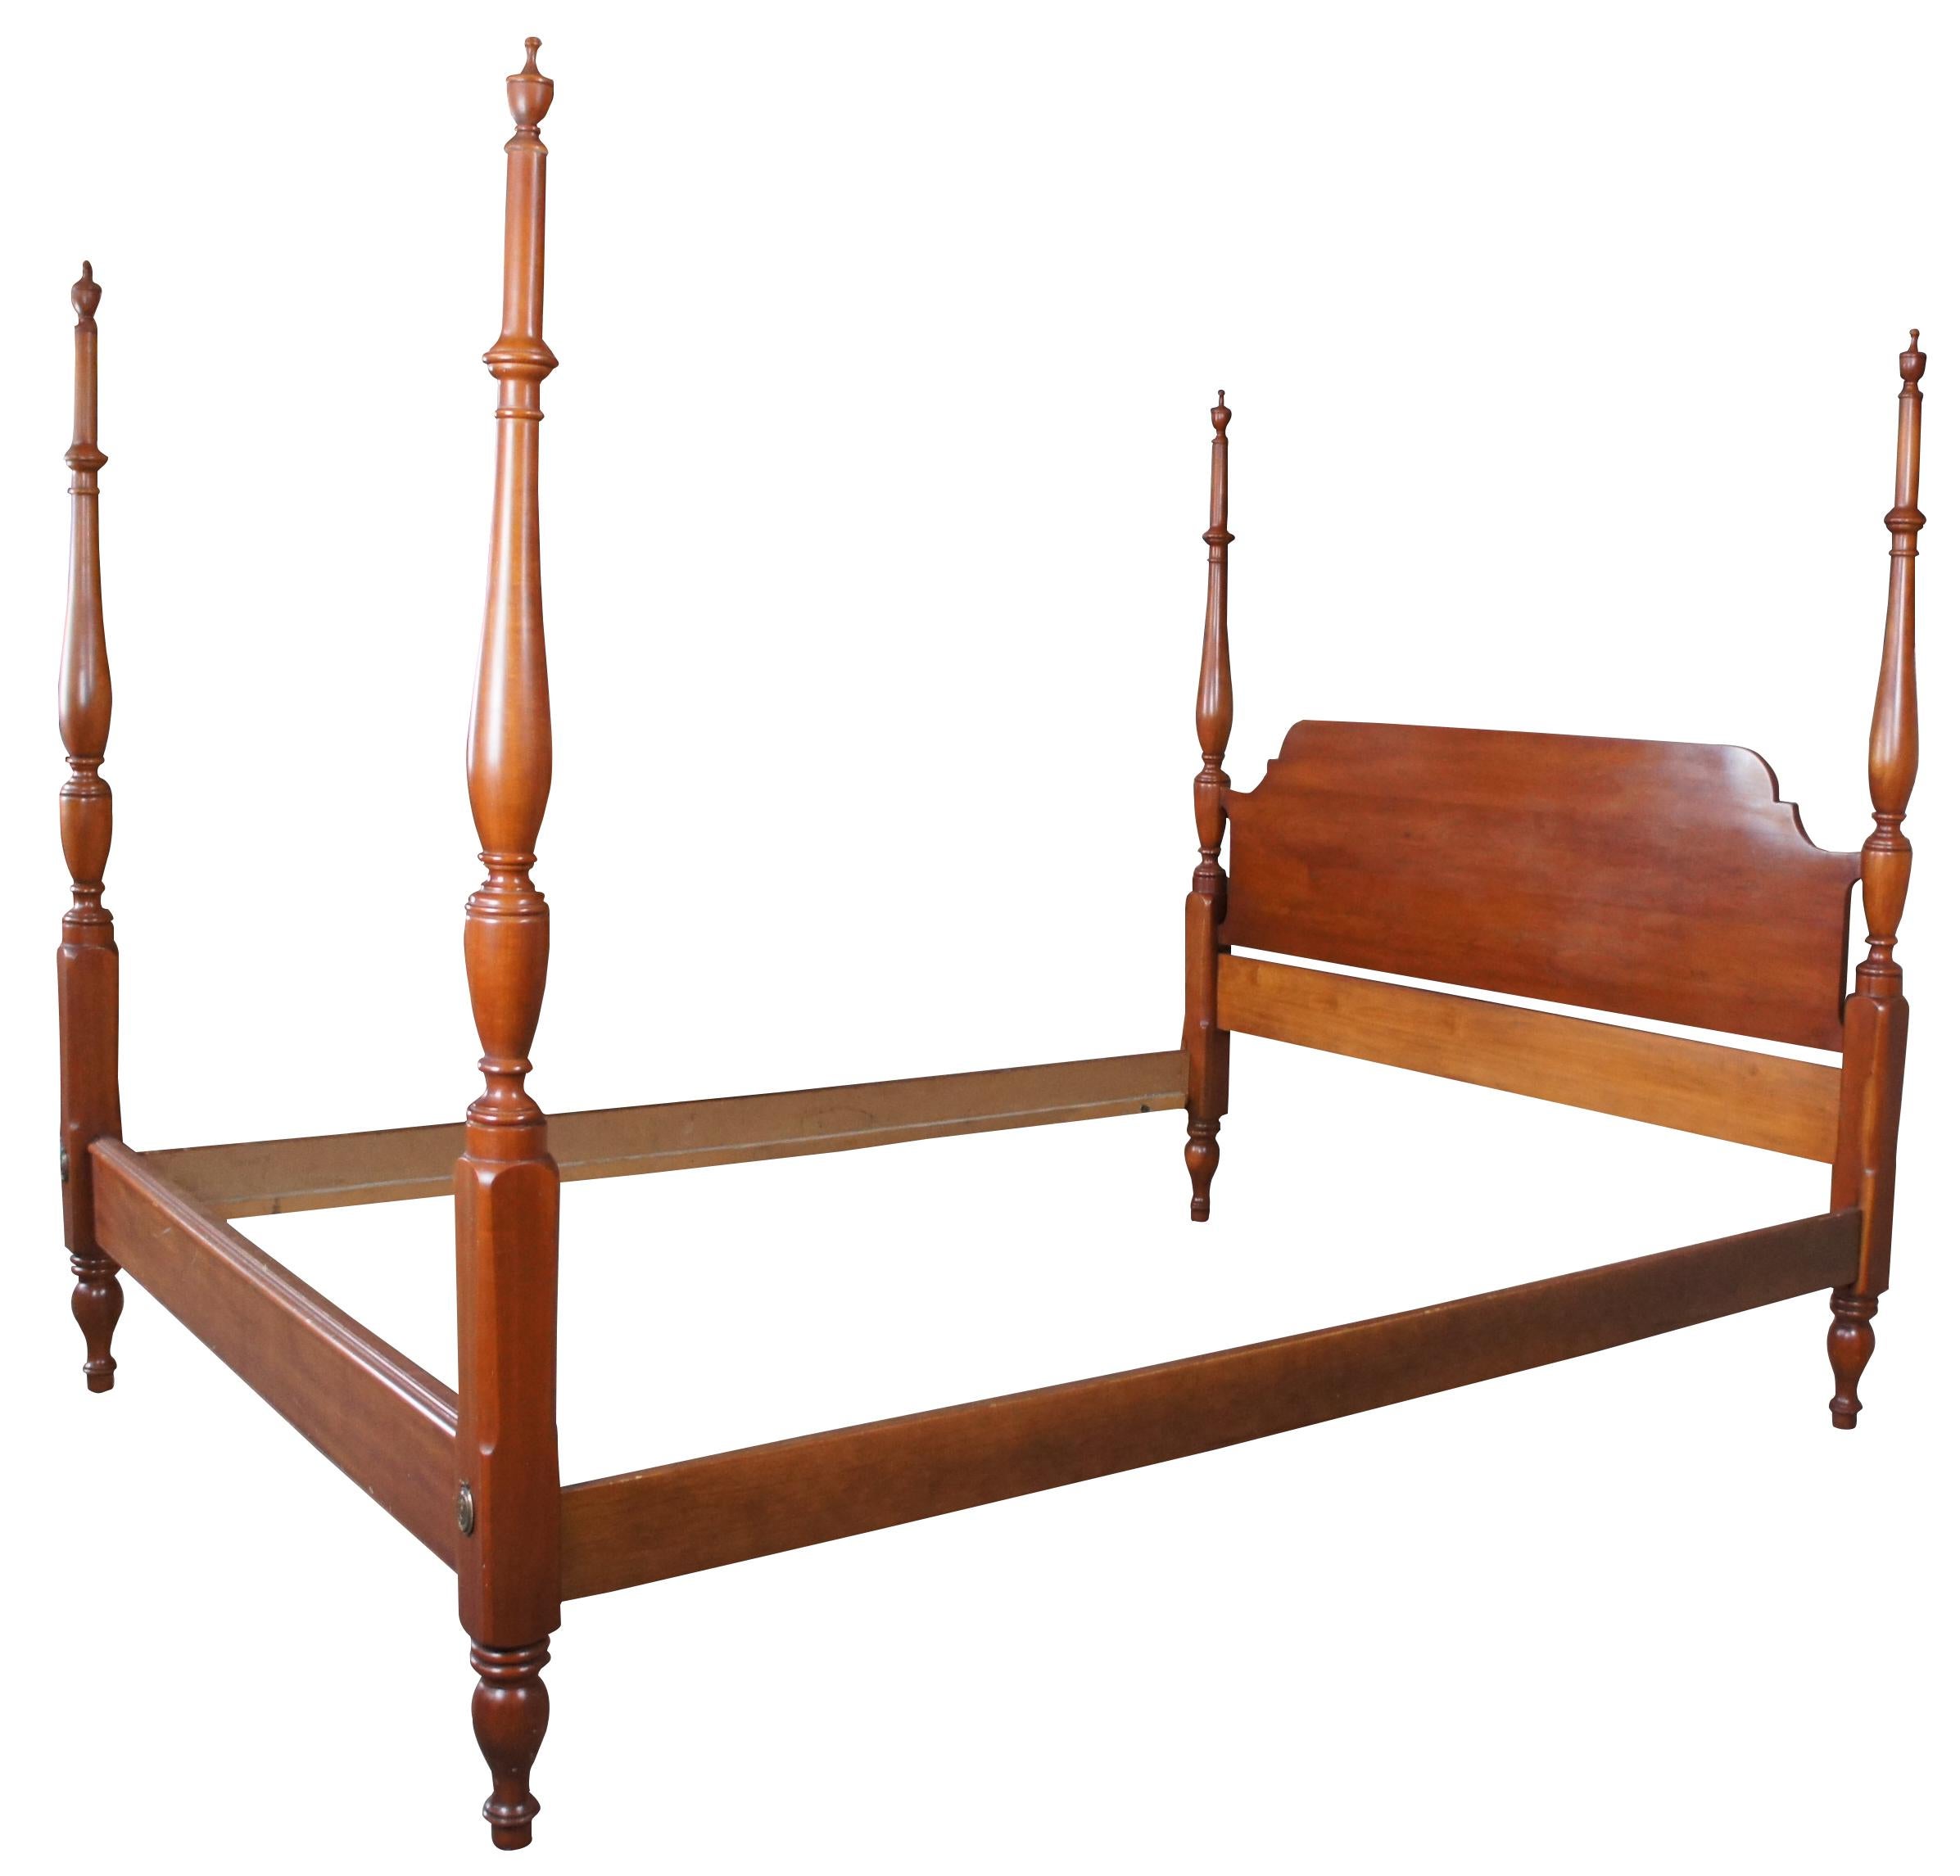 Vintage Henkel Harris Virginia Galleries four post bed made of cherry featuring traditional styling with trophy shaped finials.

Measures: 66